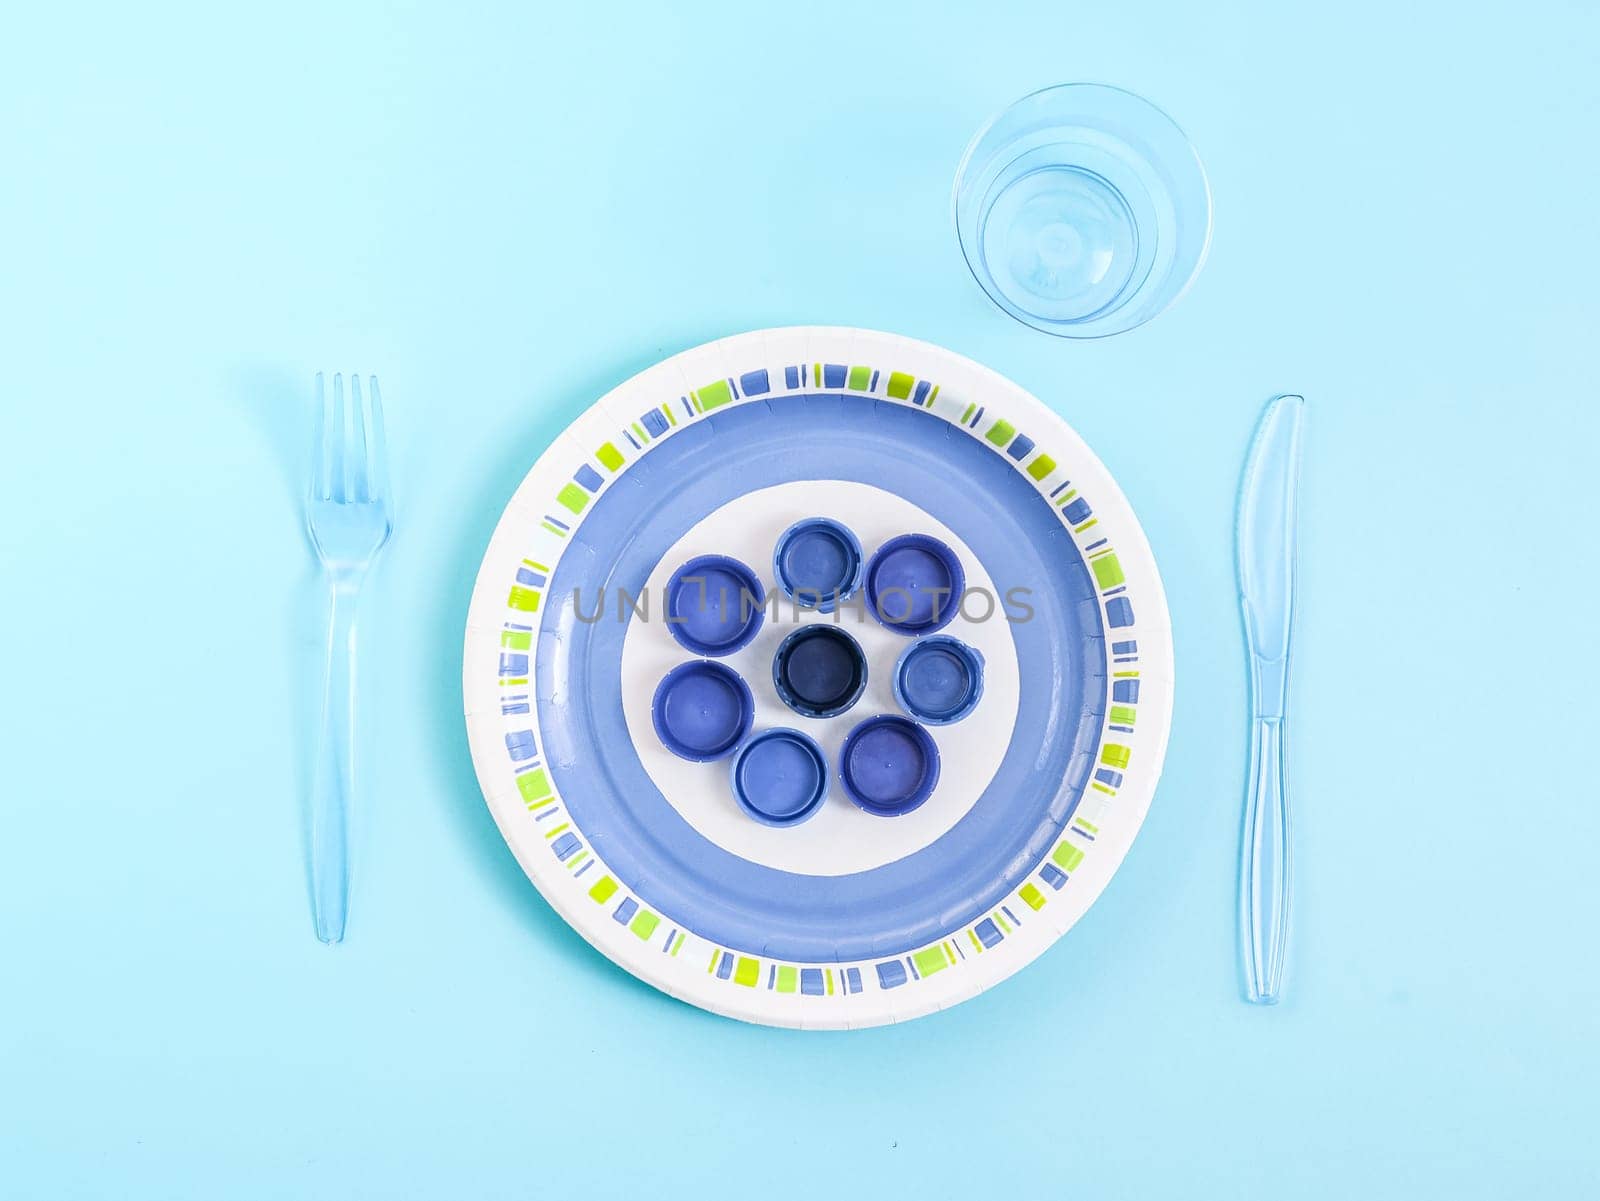 A paper plate with plastic bottle caps, with a plastic glass, a fork and a knife on a light blue background, a flat lay close-up. The concept of ecology, disposable cutlery, serving and plastic food.